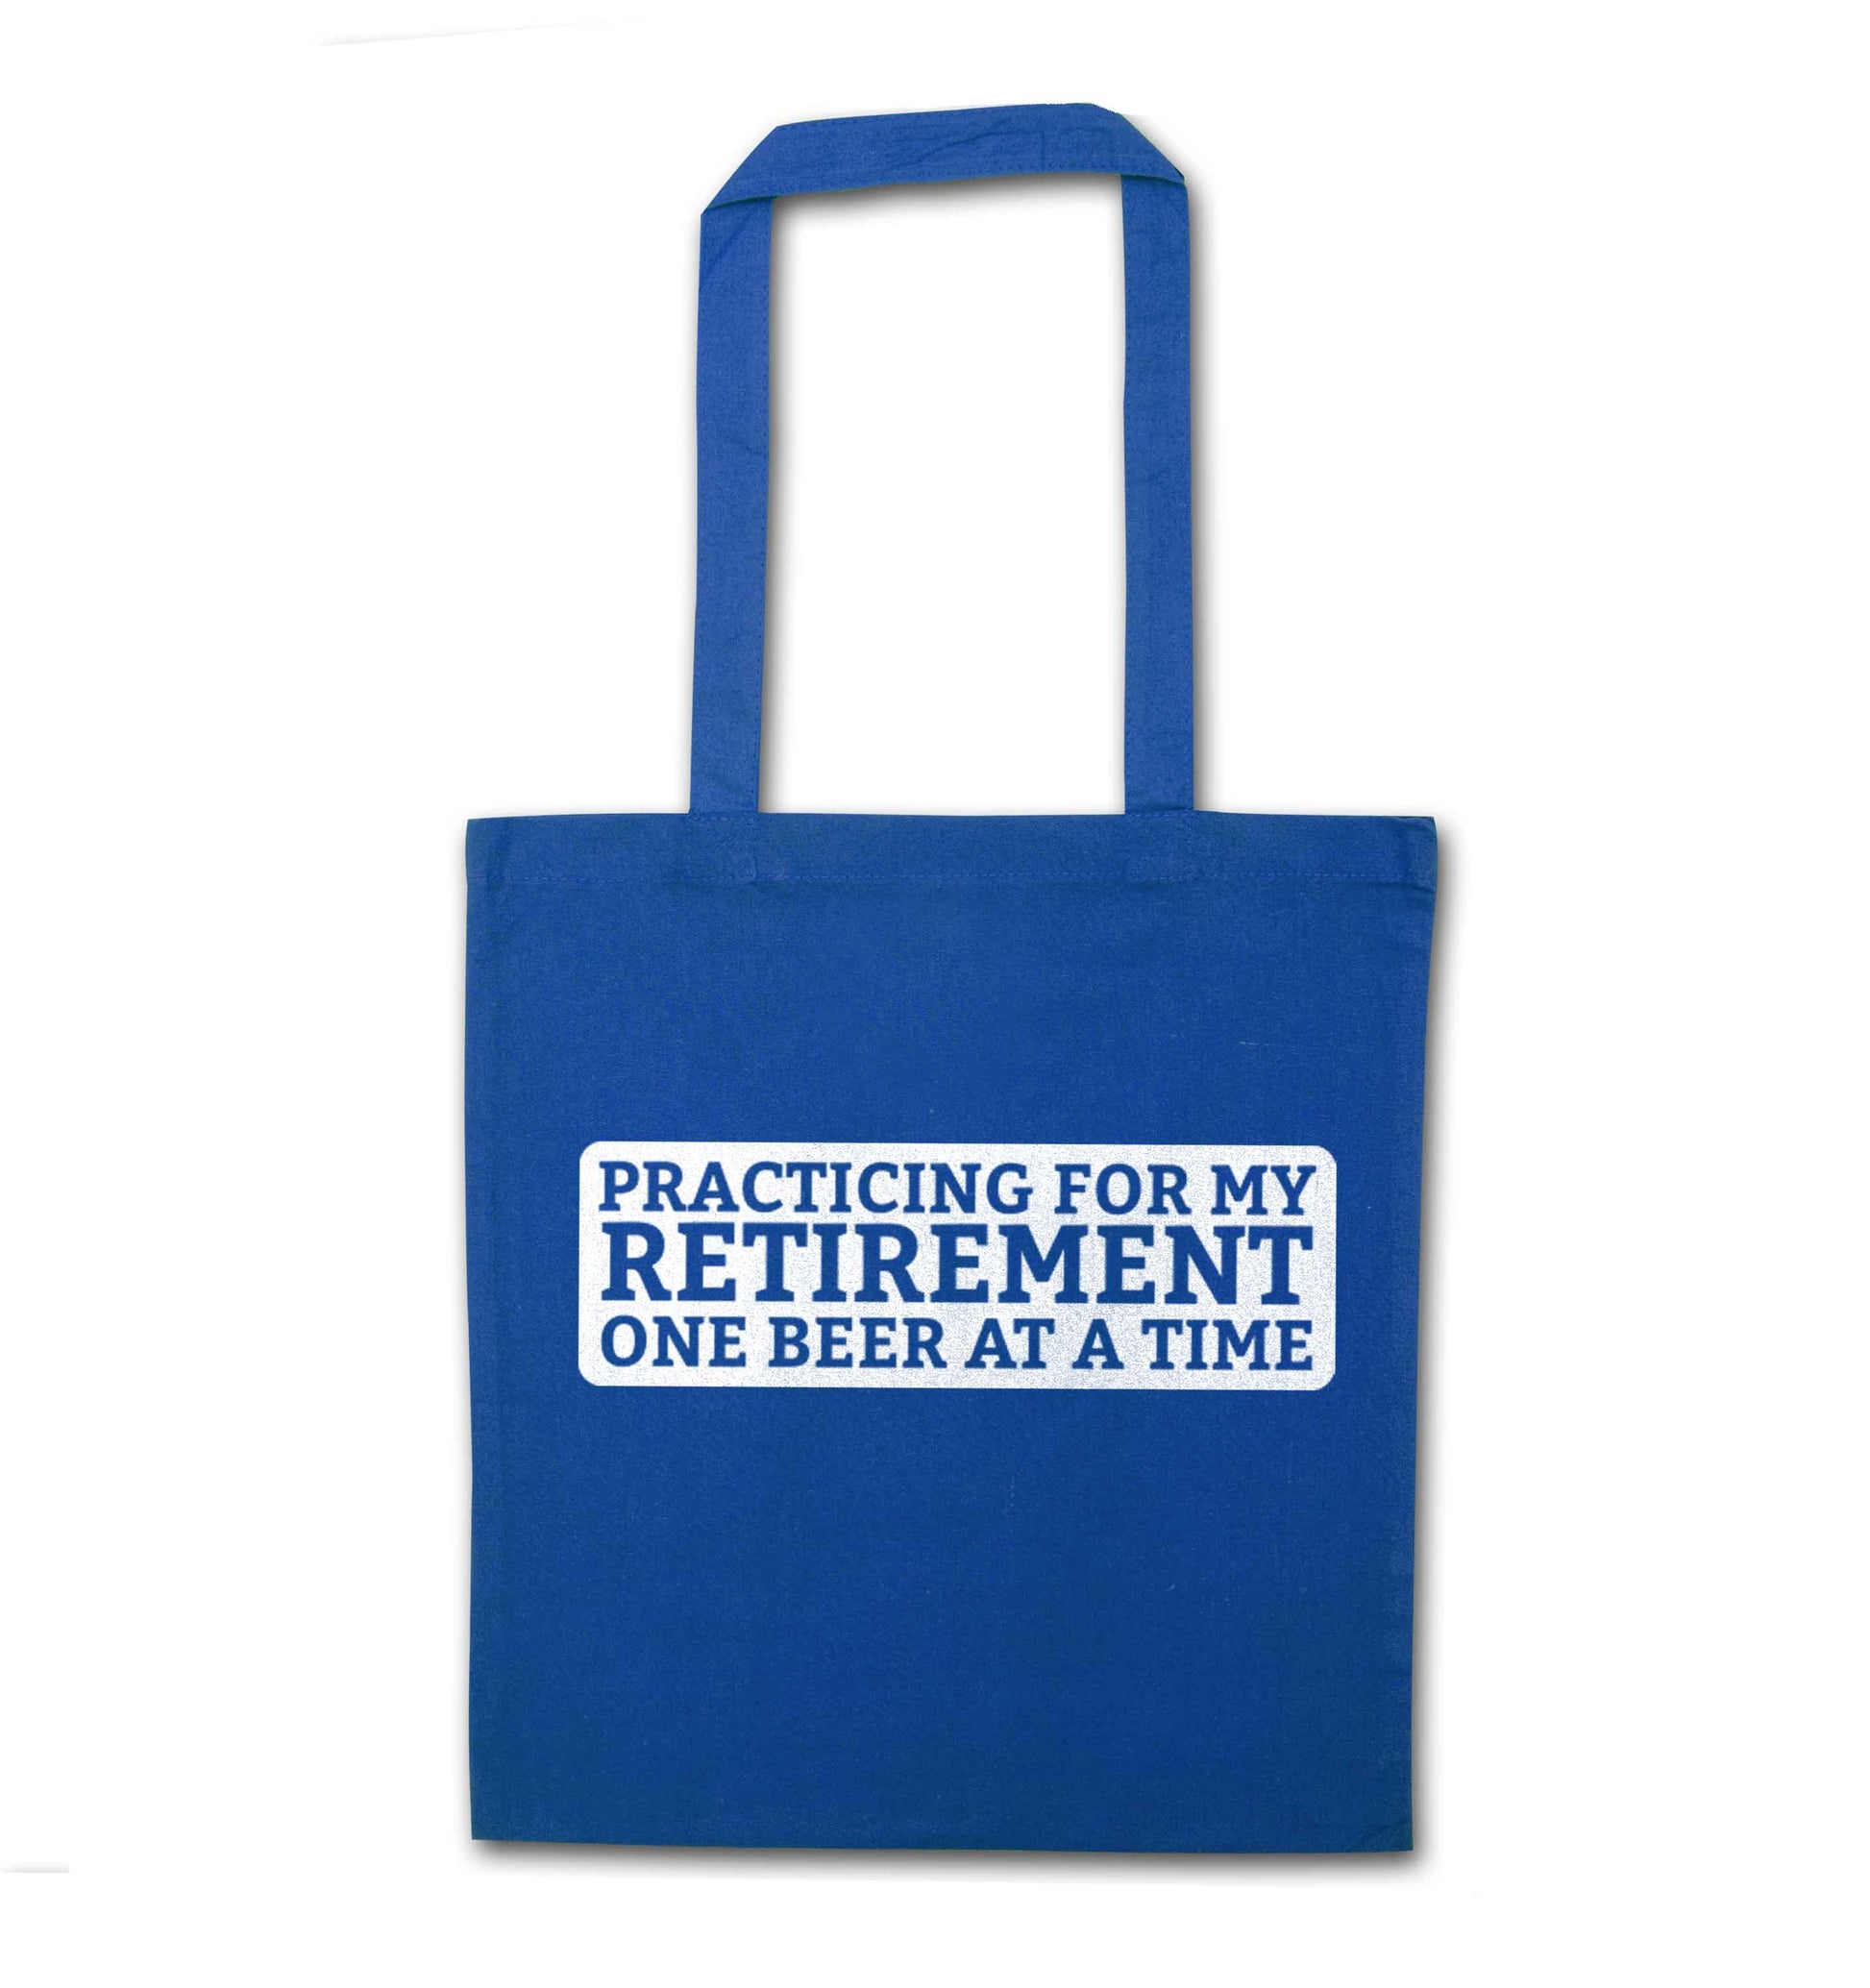 Practicing for my Retirement one Beer at a Time blue tote bag